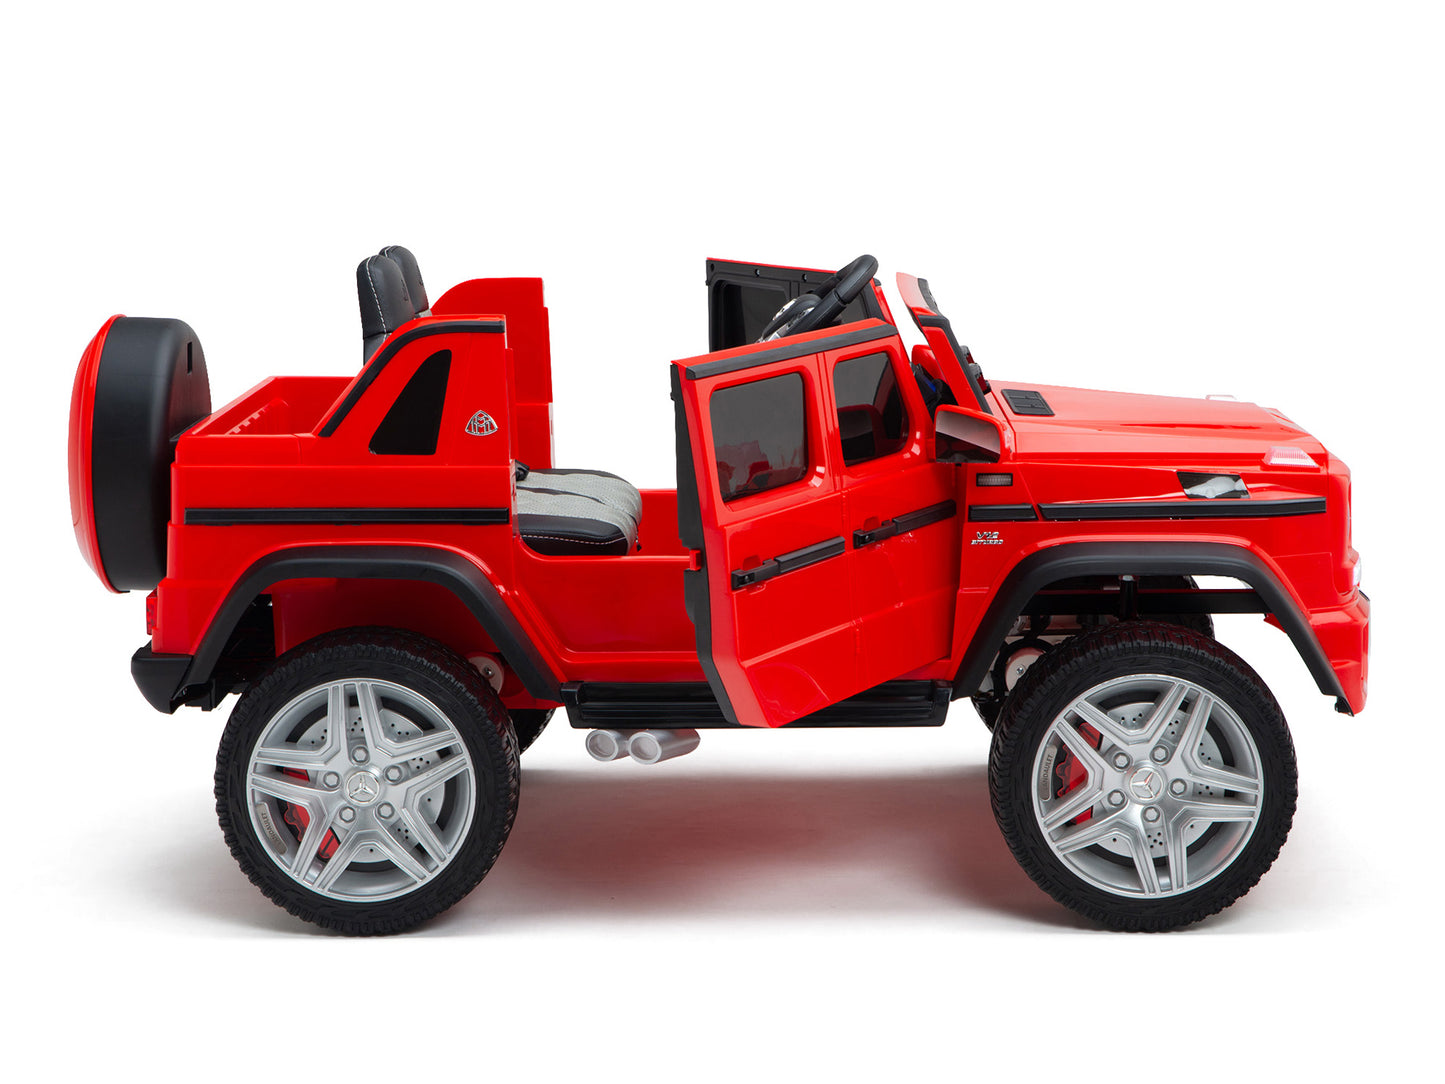 12V Mercedes-Maybach G650 Landaulet Kids Ride On Car/SUV with Remote – Red